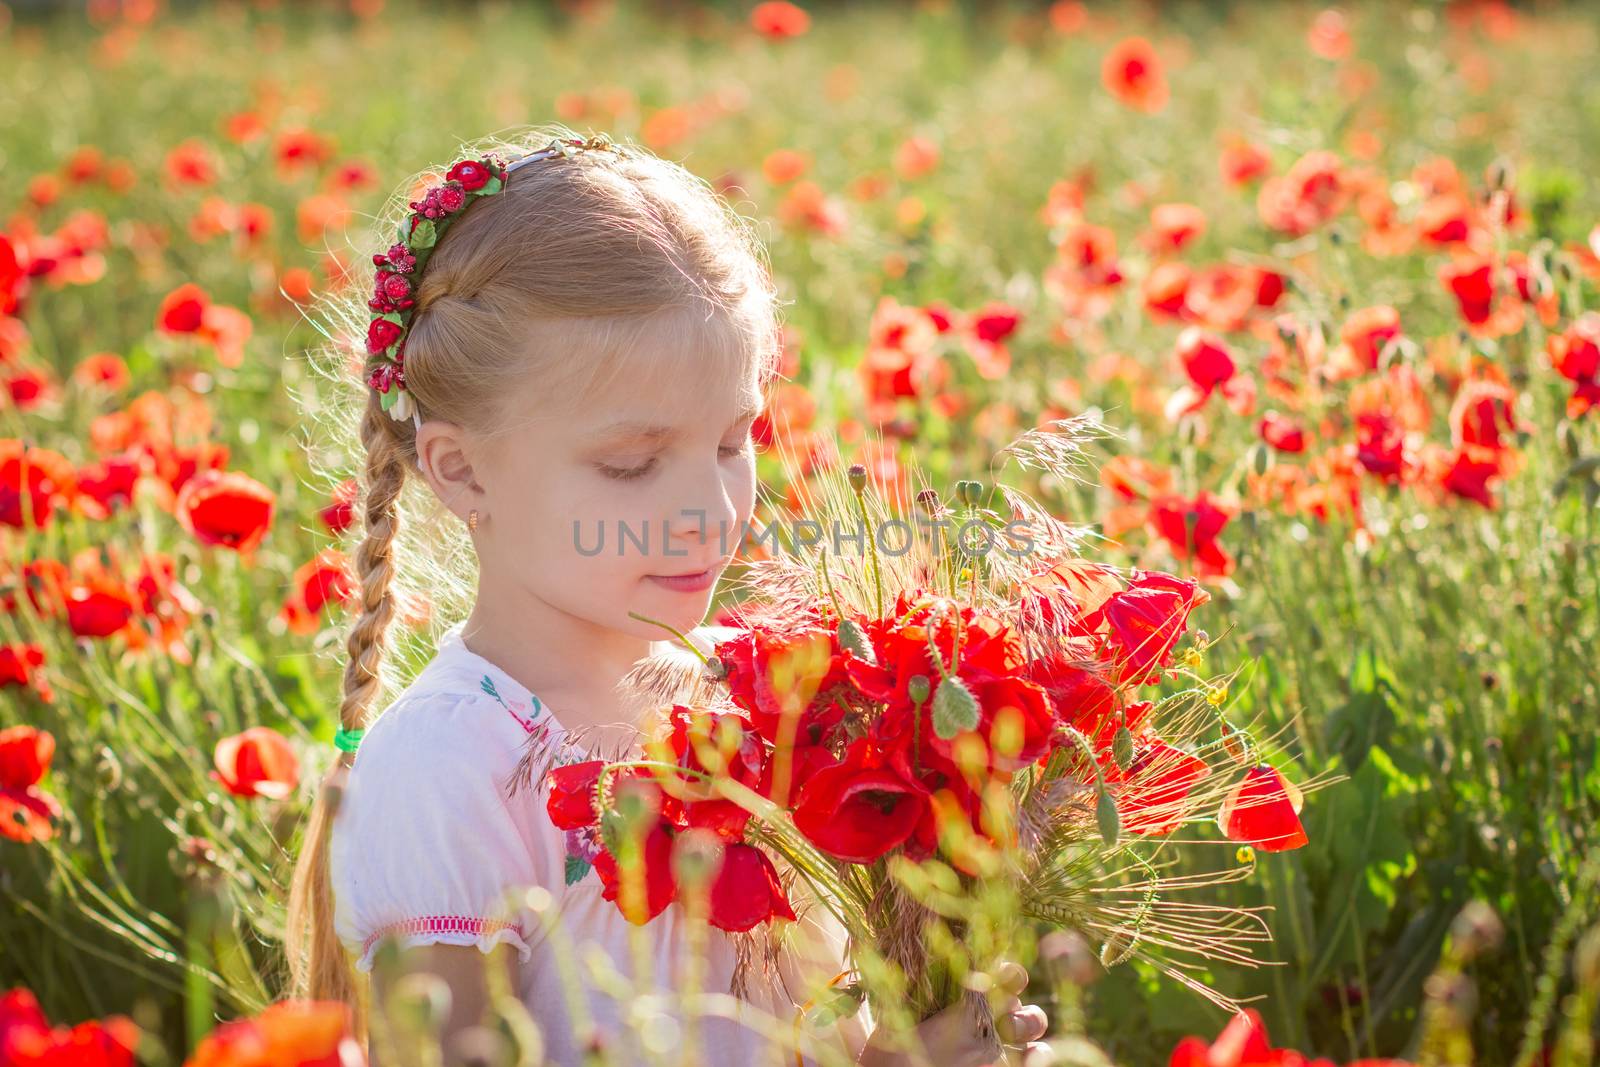 Young girl with bouquet among poppies field at sinset